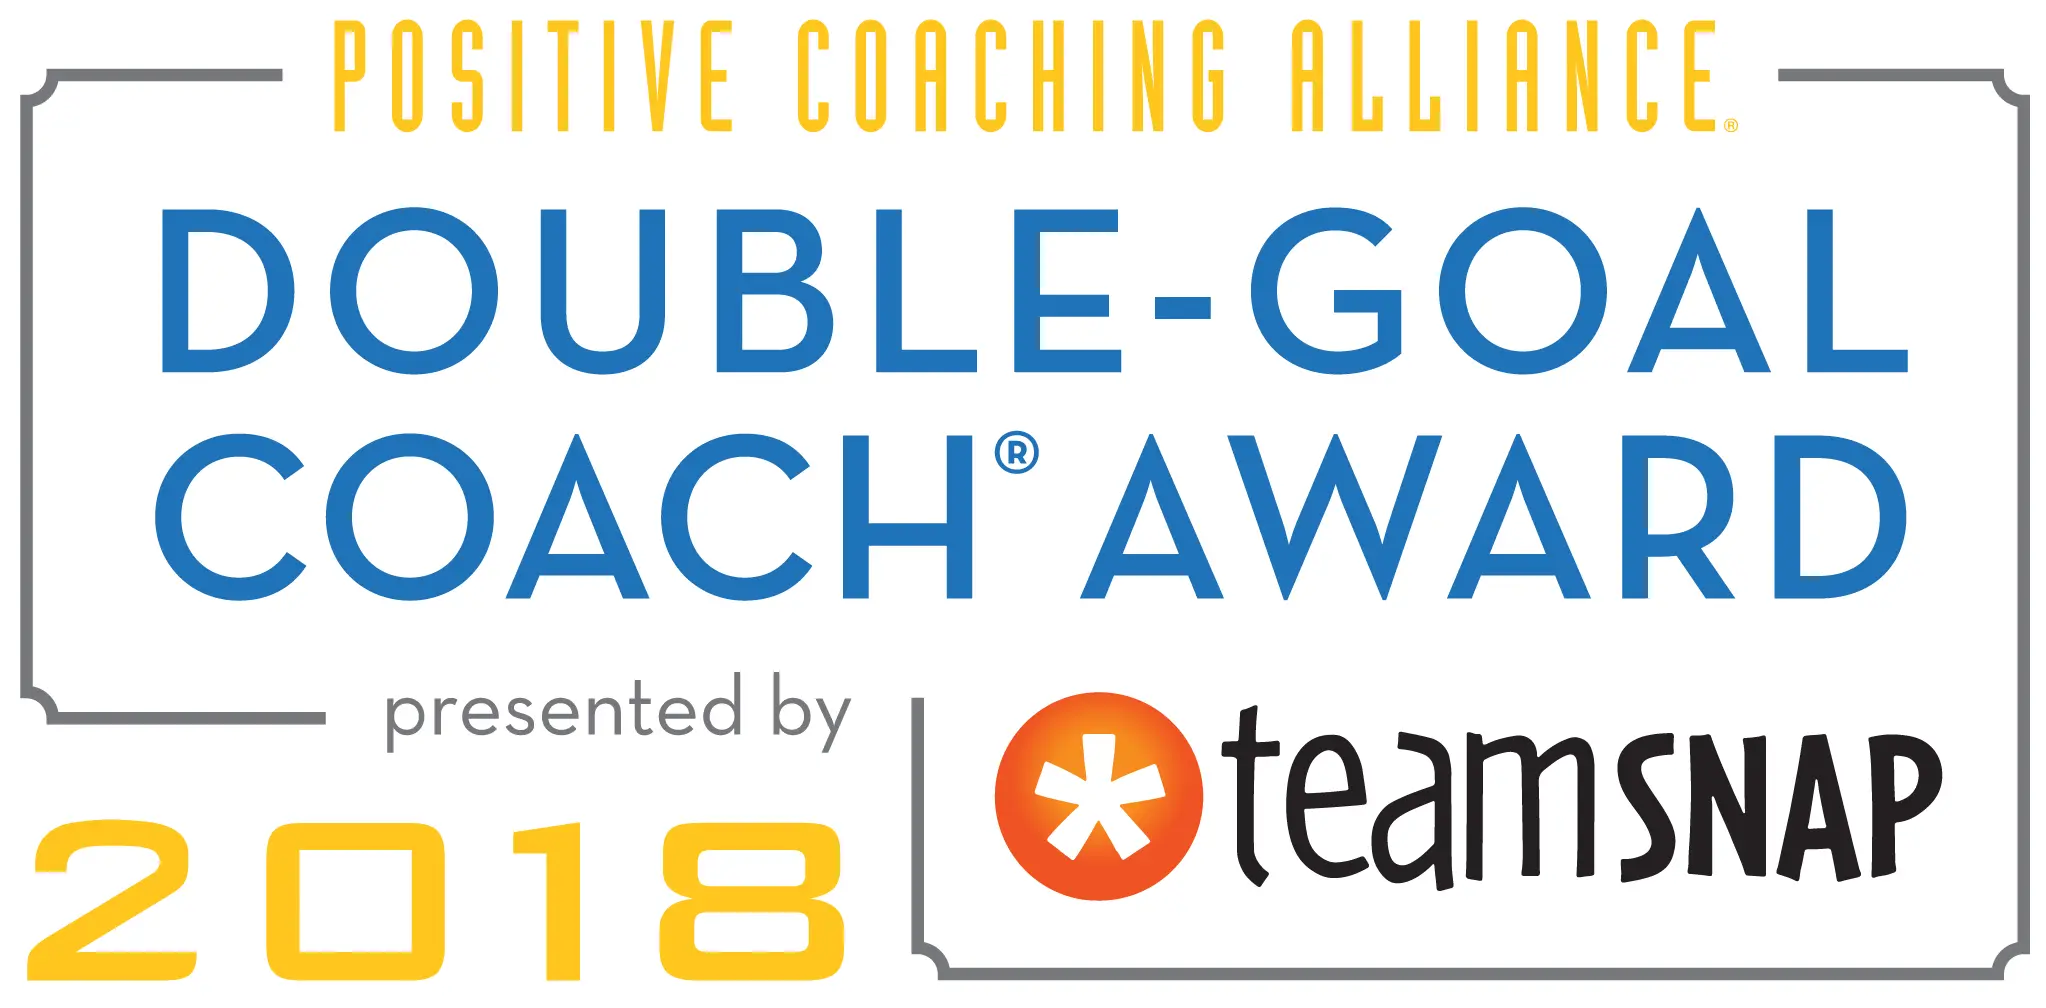 Featured image: Say Thanks to Your Coach with an Award from the Positive Coaching Alliance!